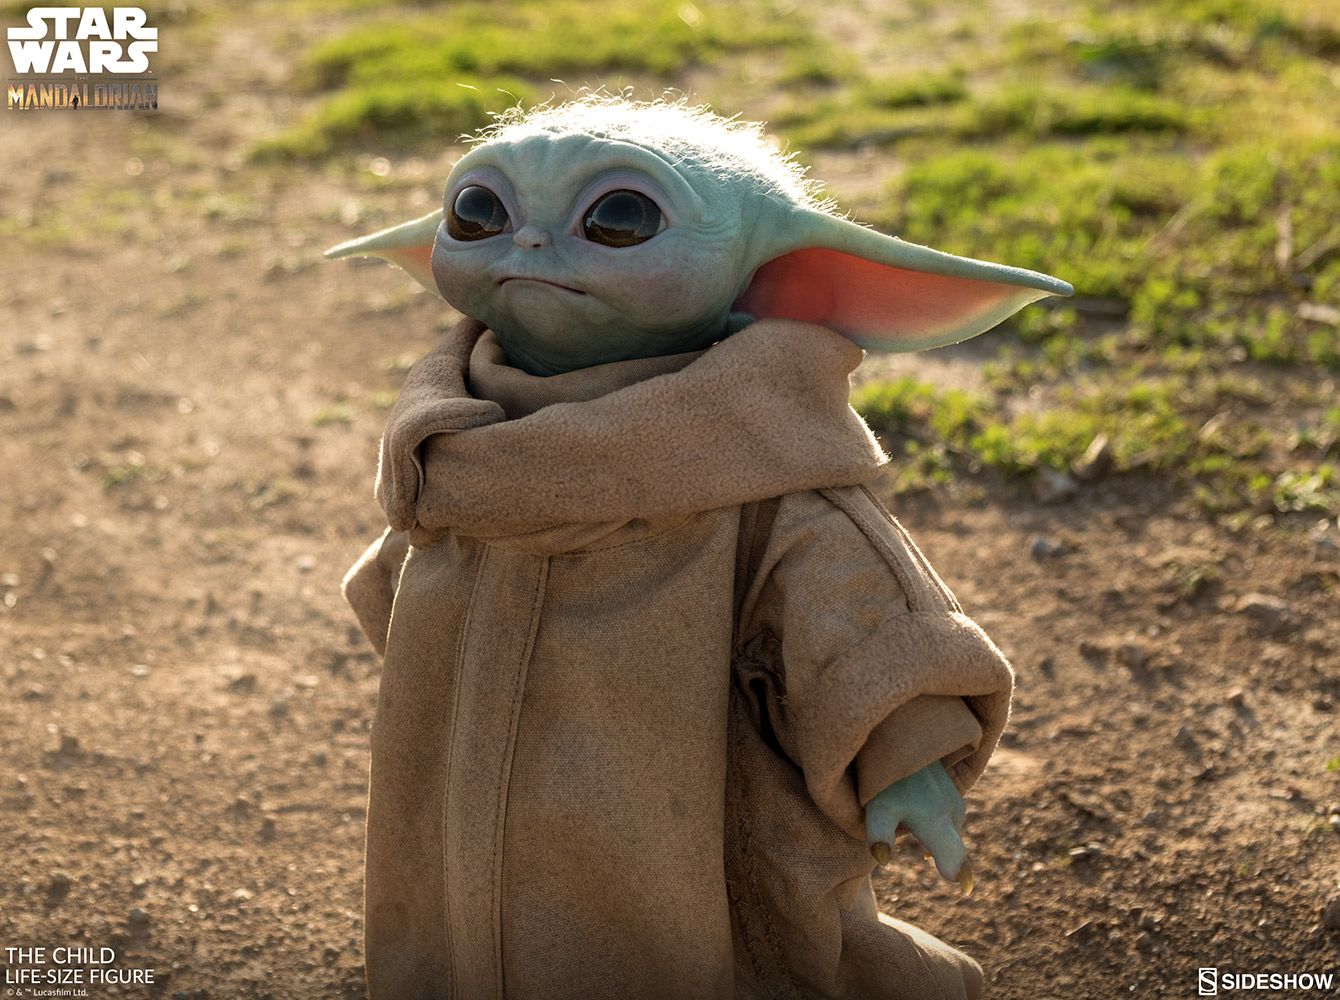 Baby Yoda Sideshow Collectible Figure on Sale Now | Collider